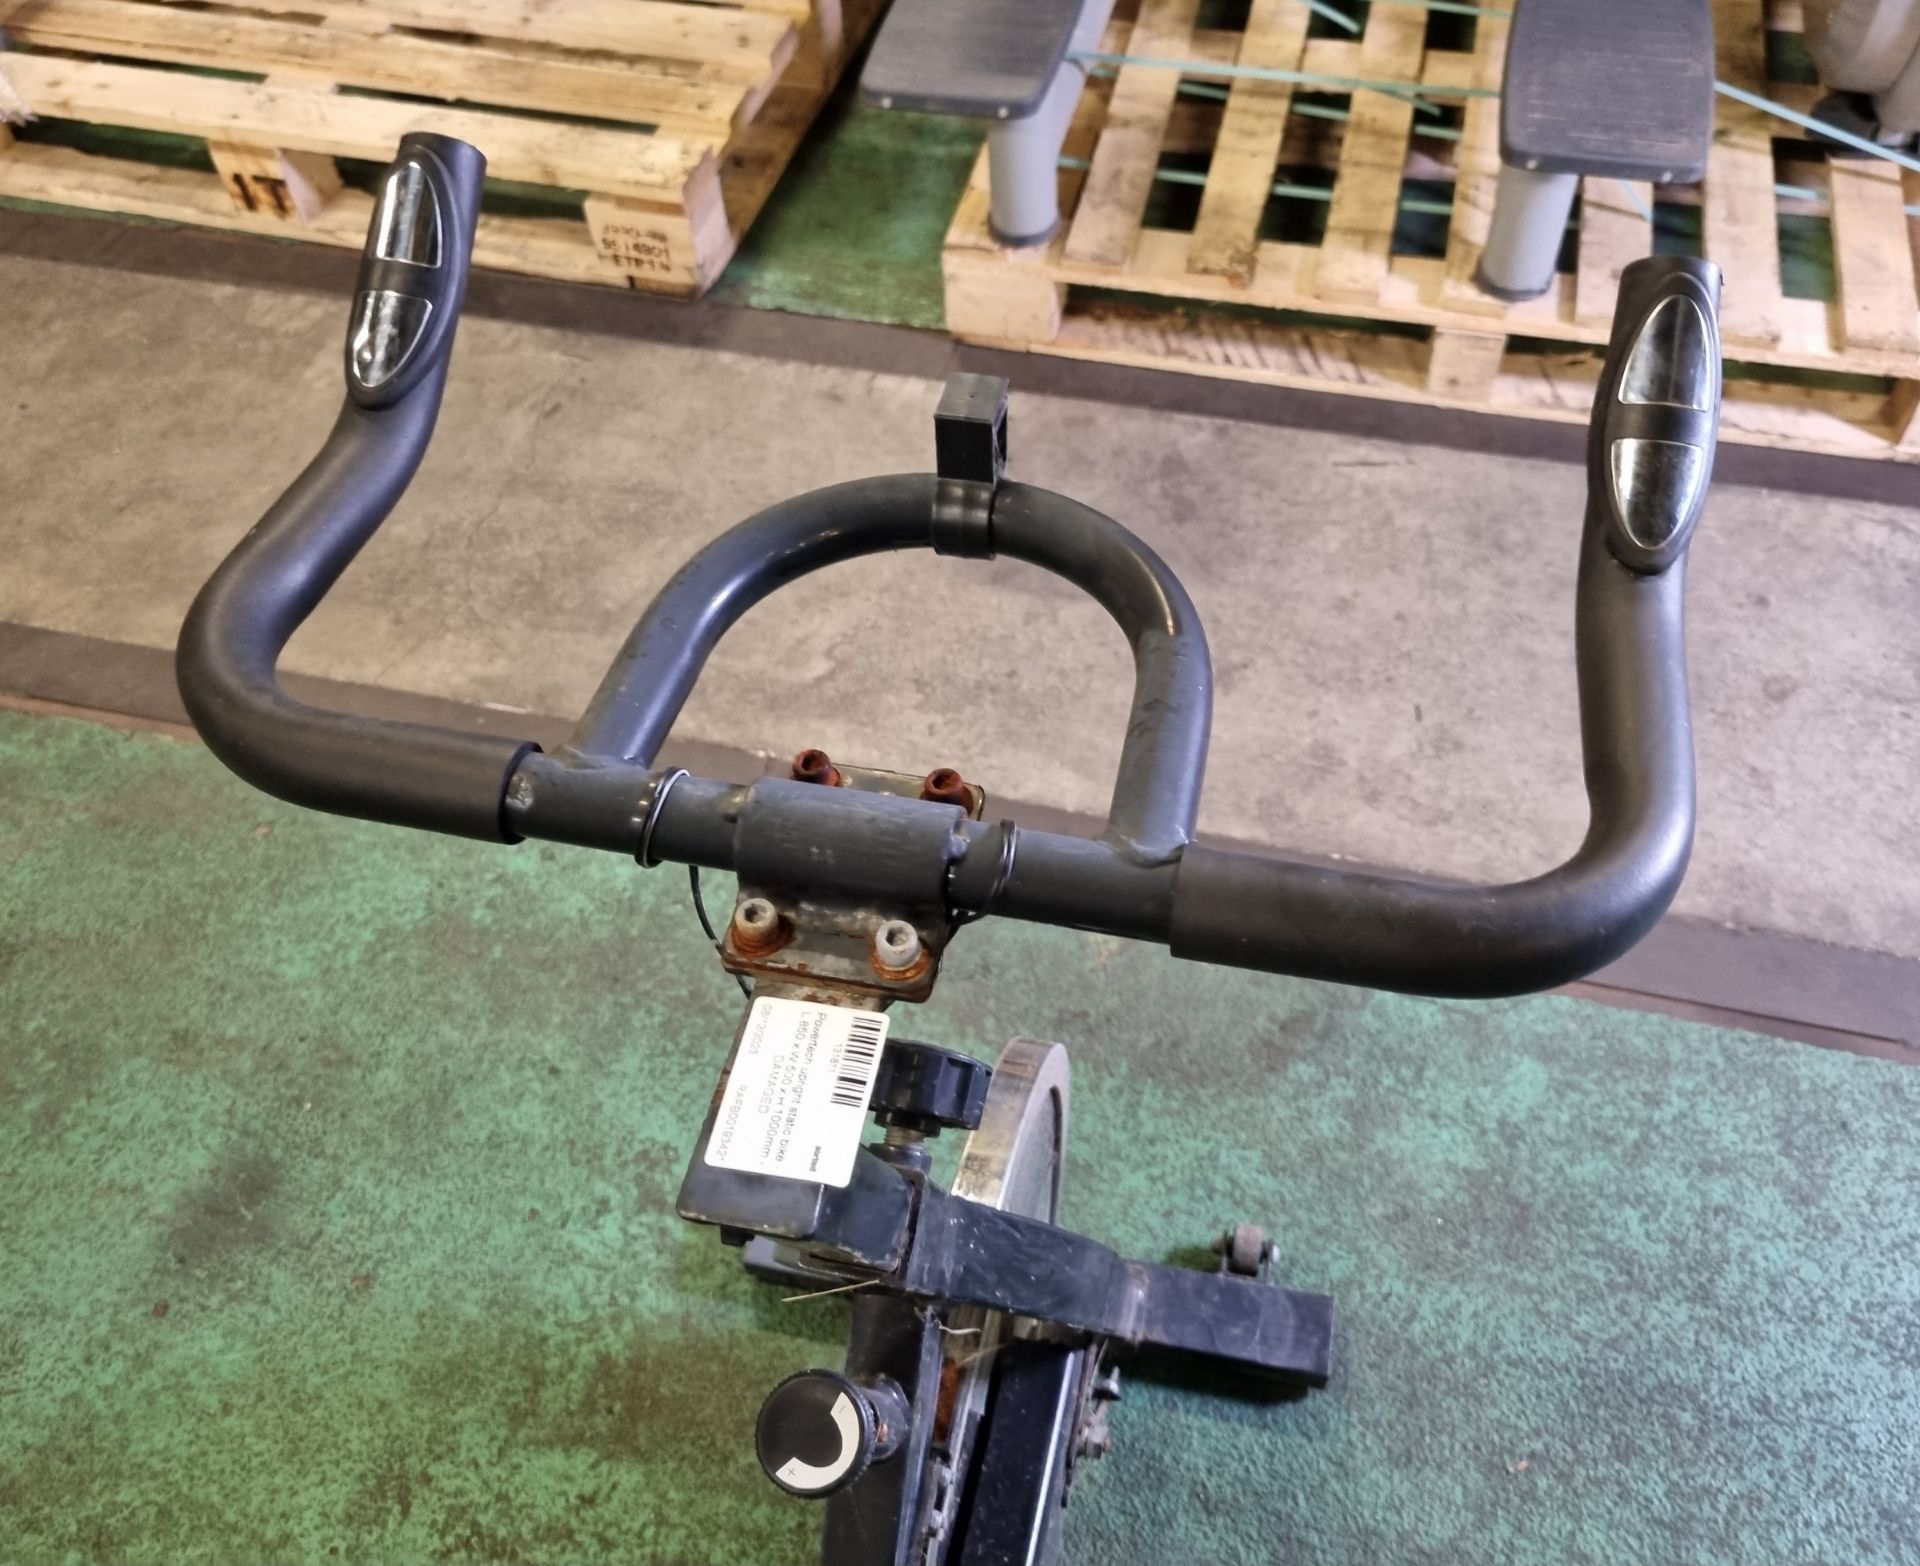 2x static exercise bikes - AS SPARES OR REPAIRS - Full details in the description - Image 6 of 9